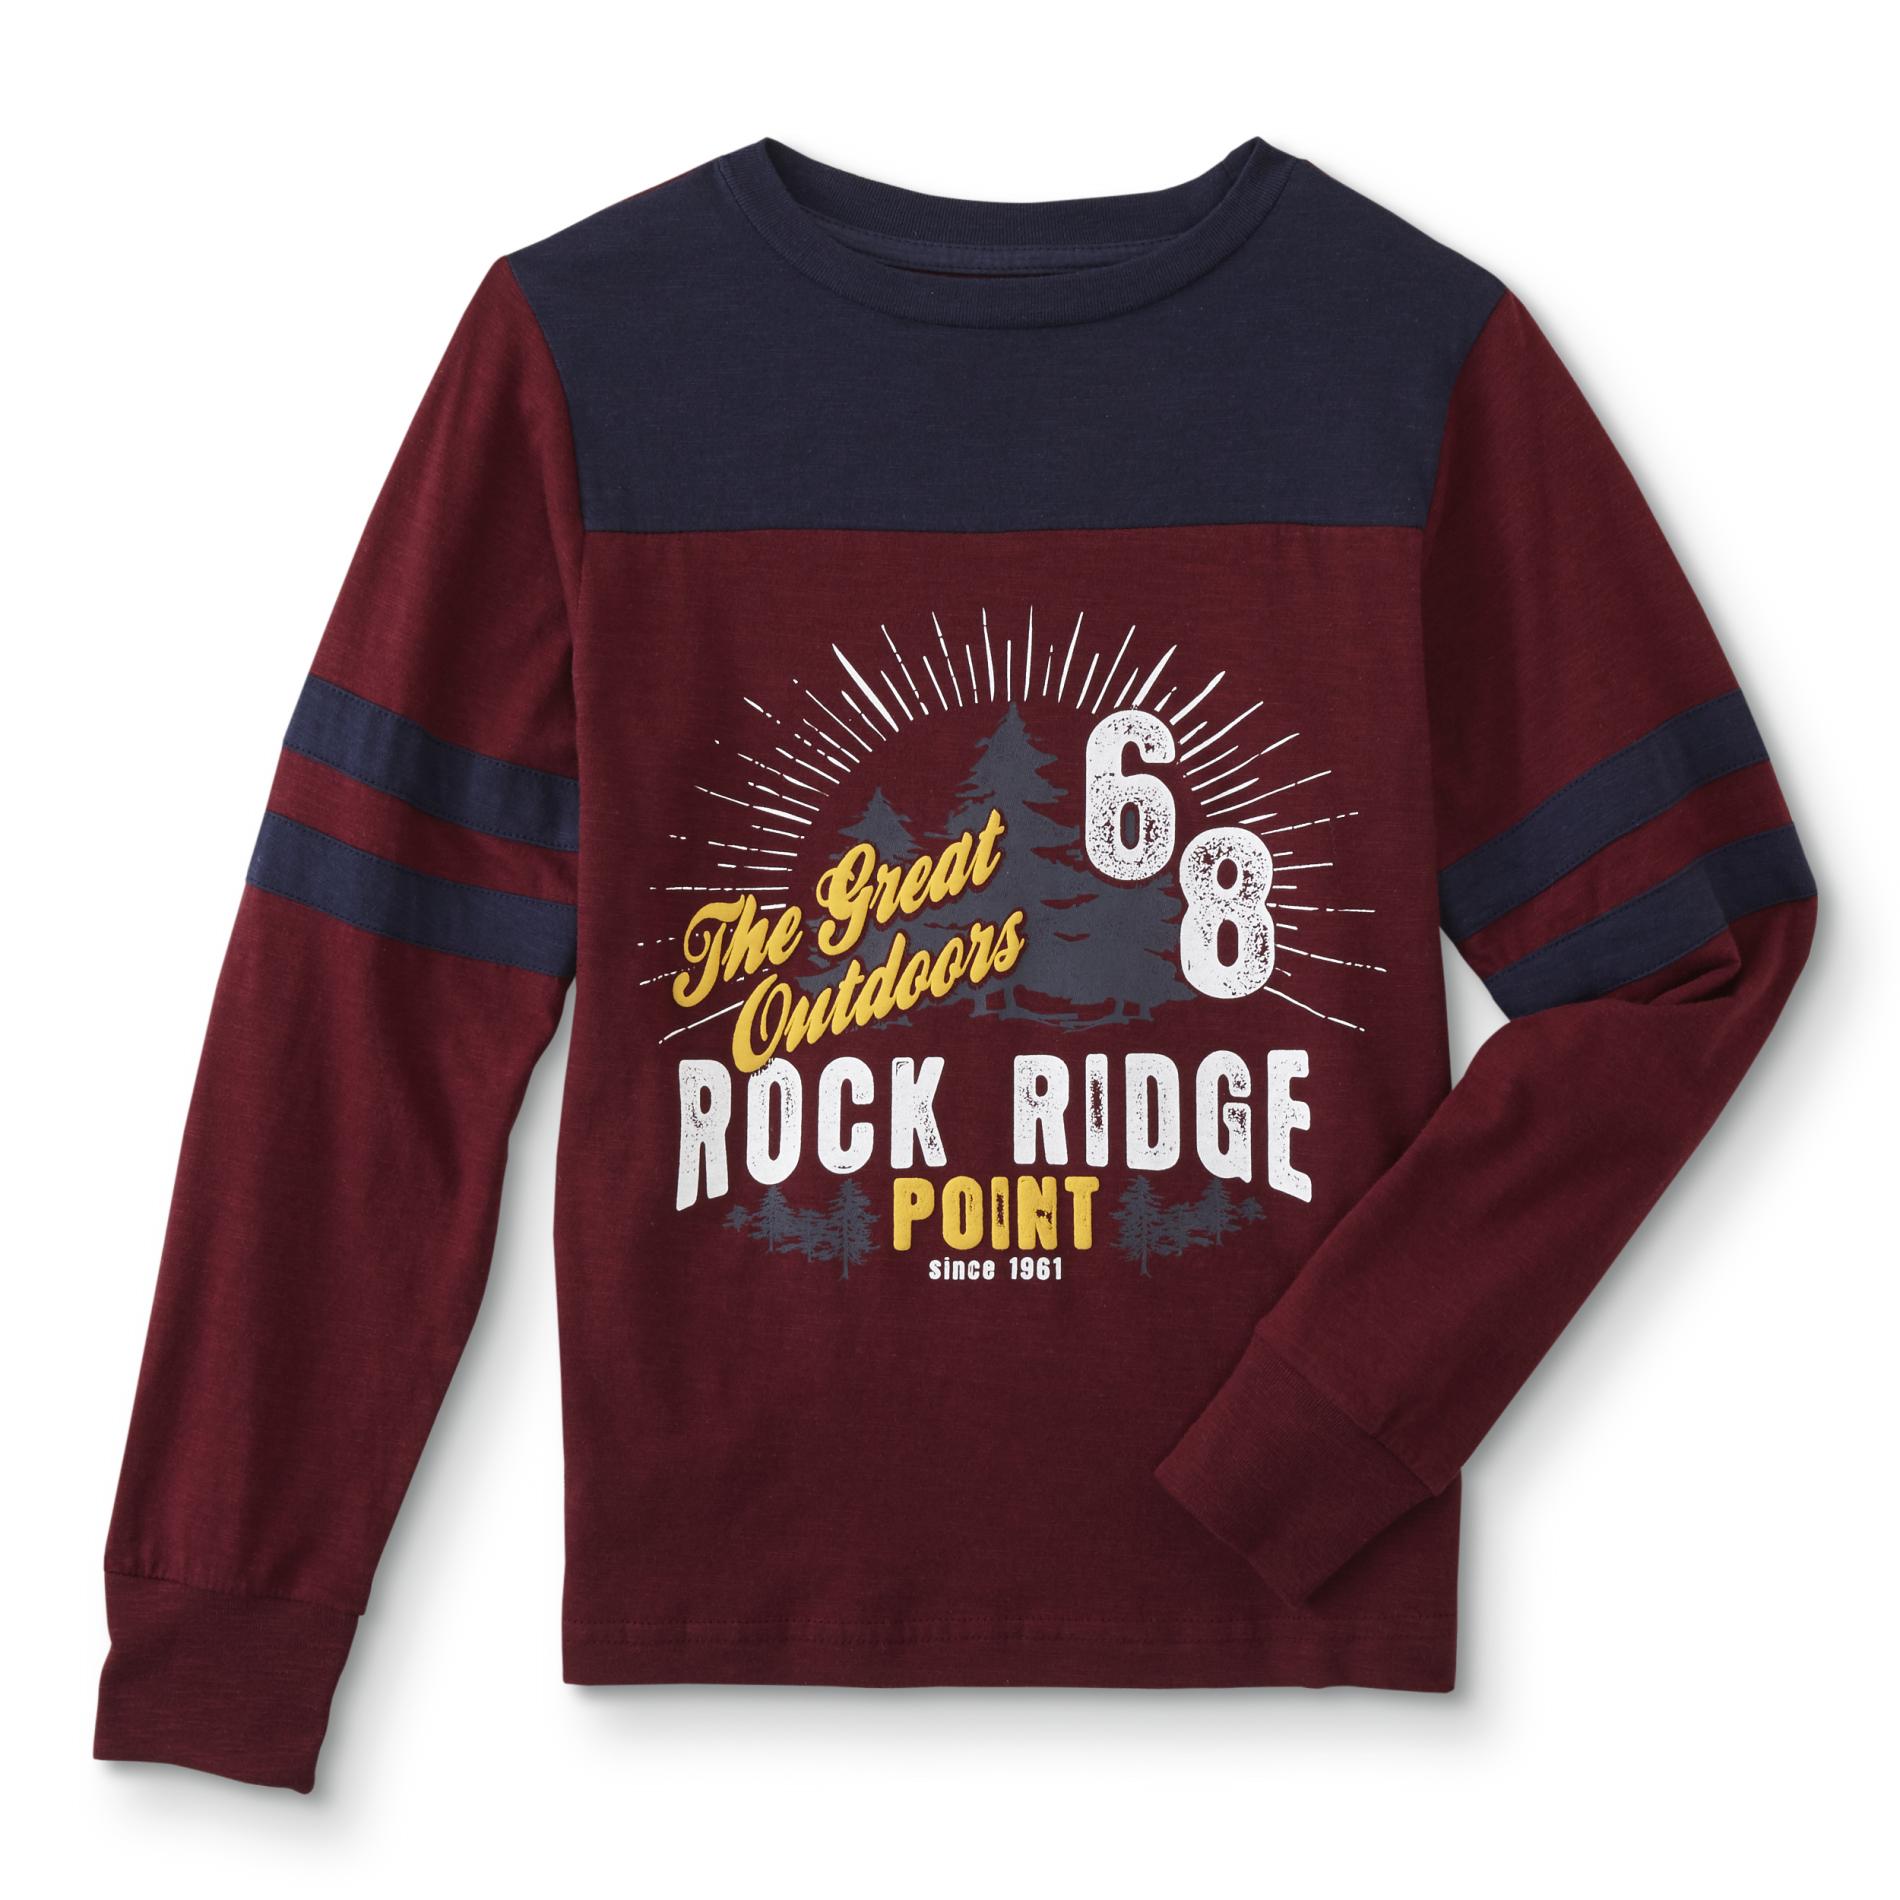 Route 66 Boys' Graphic Long-Sleeve Shirt - The Great Outdoors